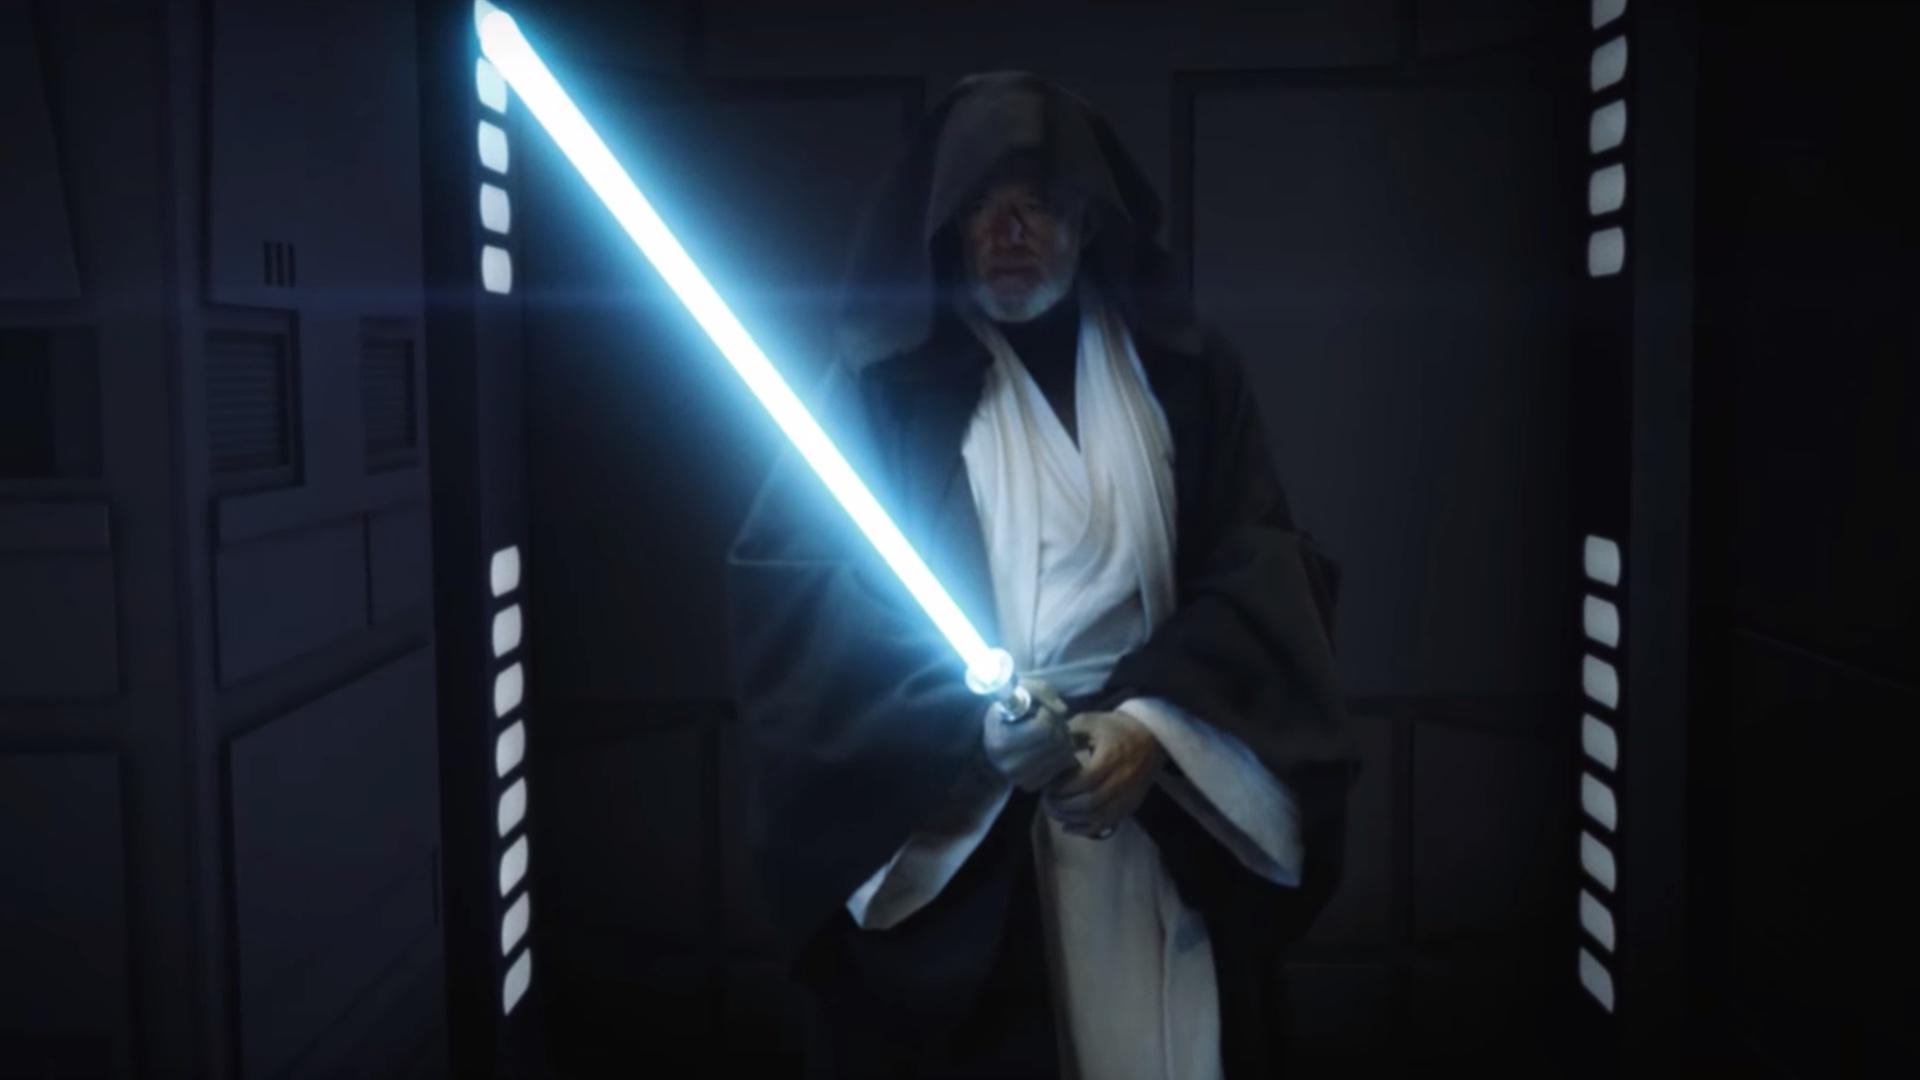 Stunning Reimagining of The Climactic Lightsaber Duel